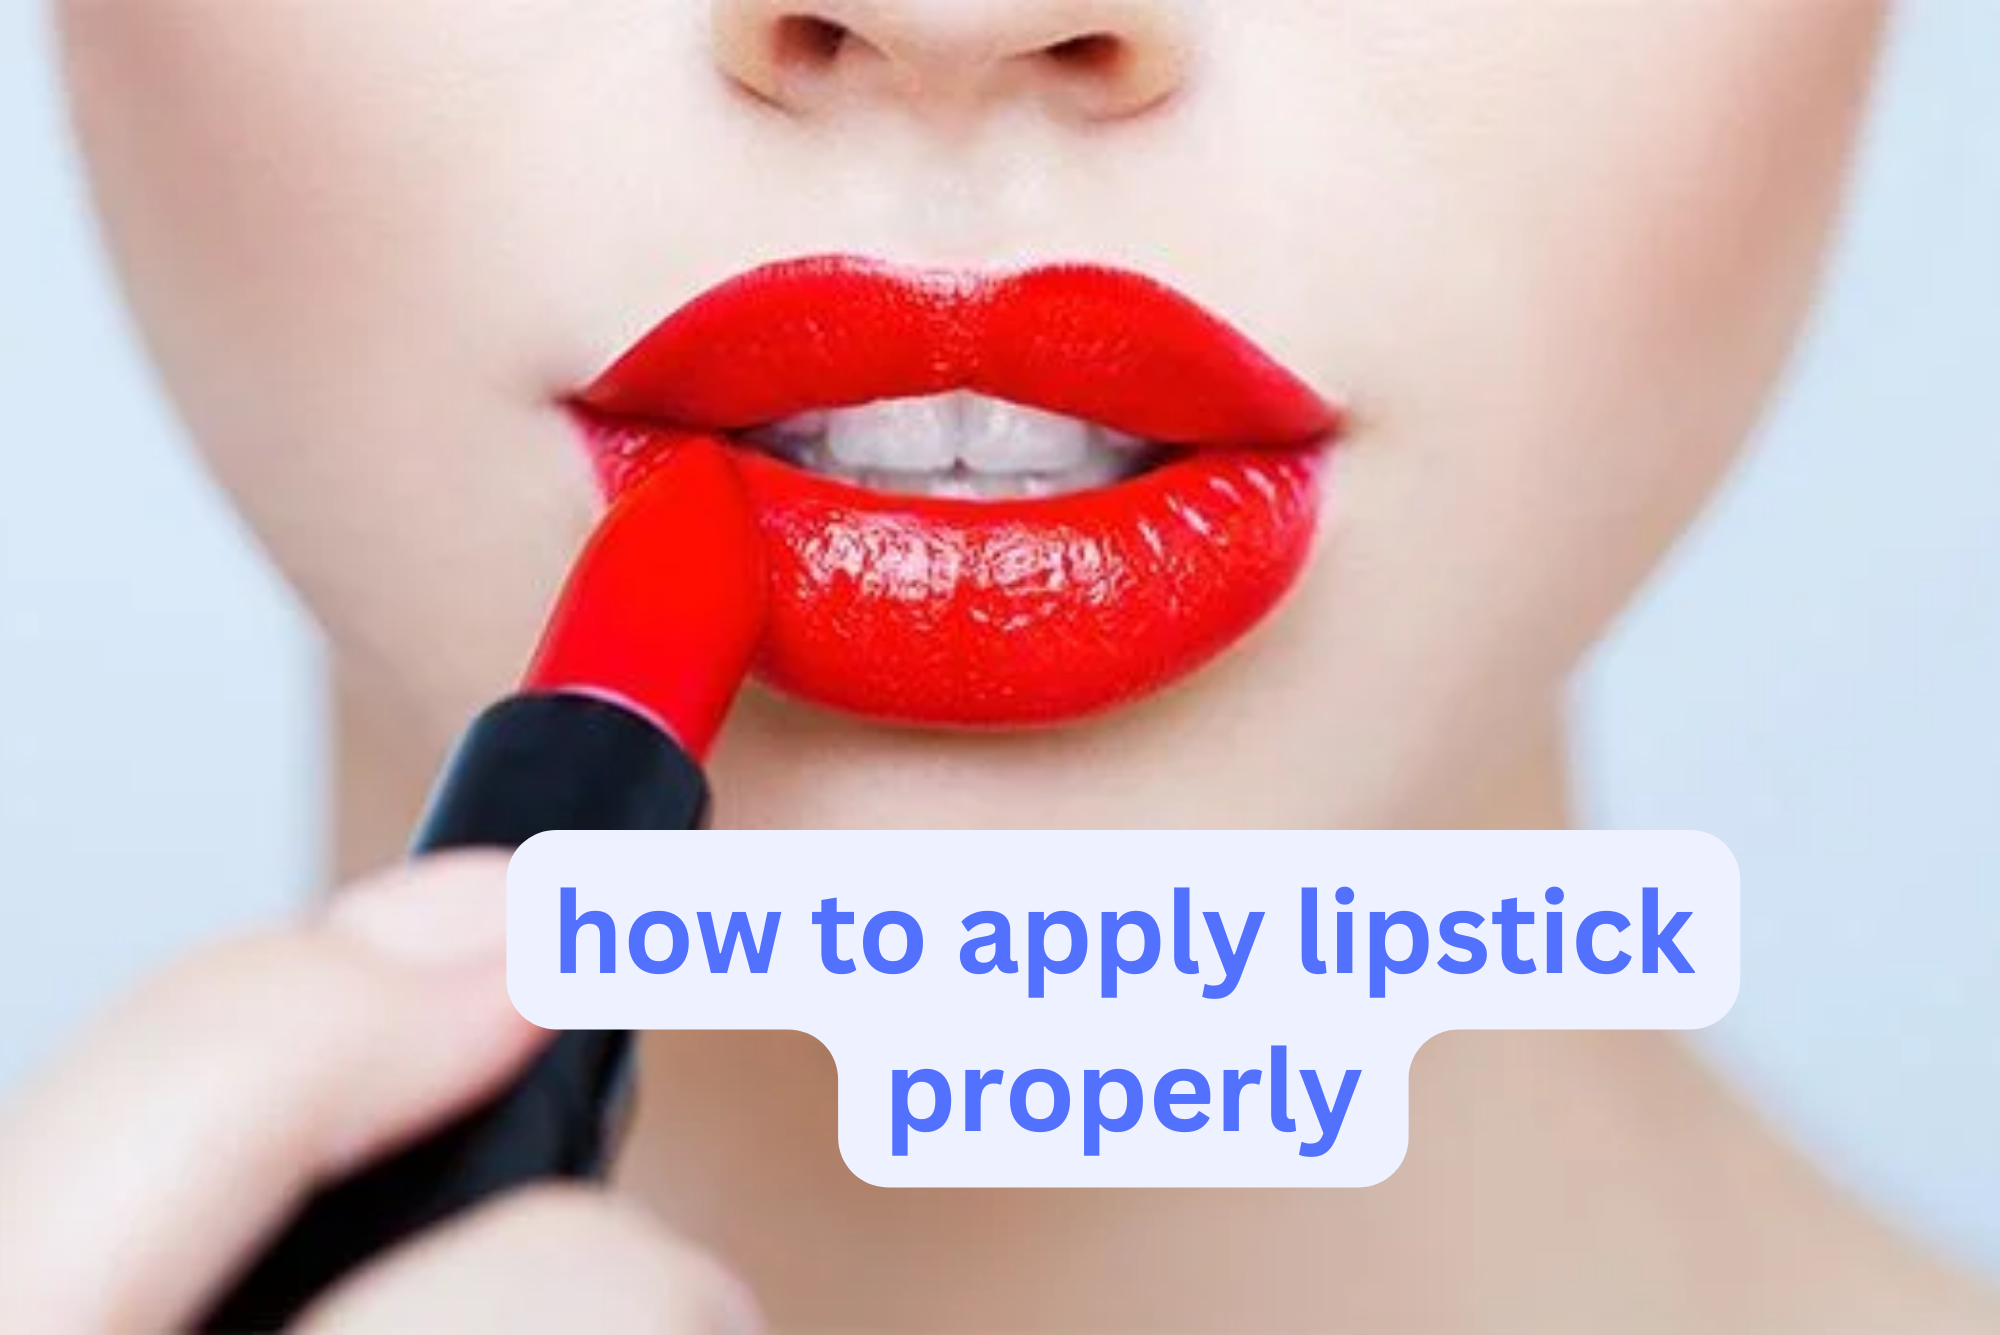 how to apply lipstick properly